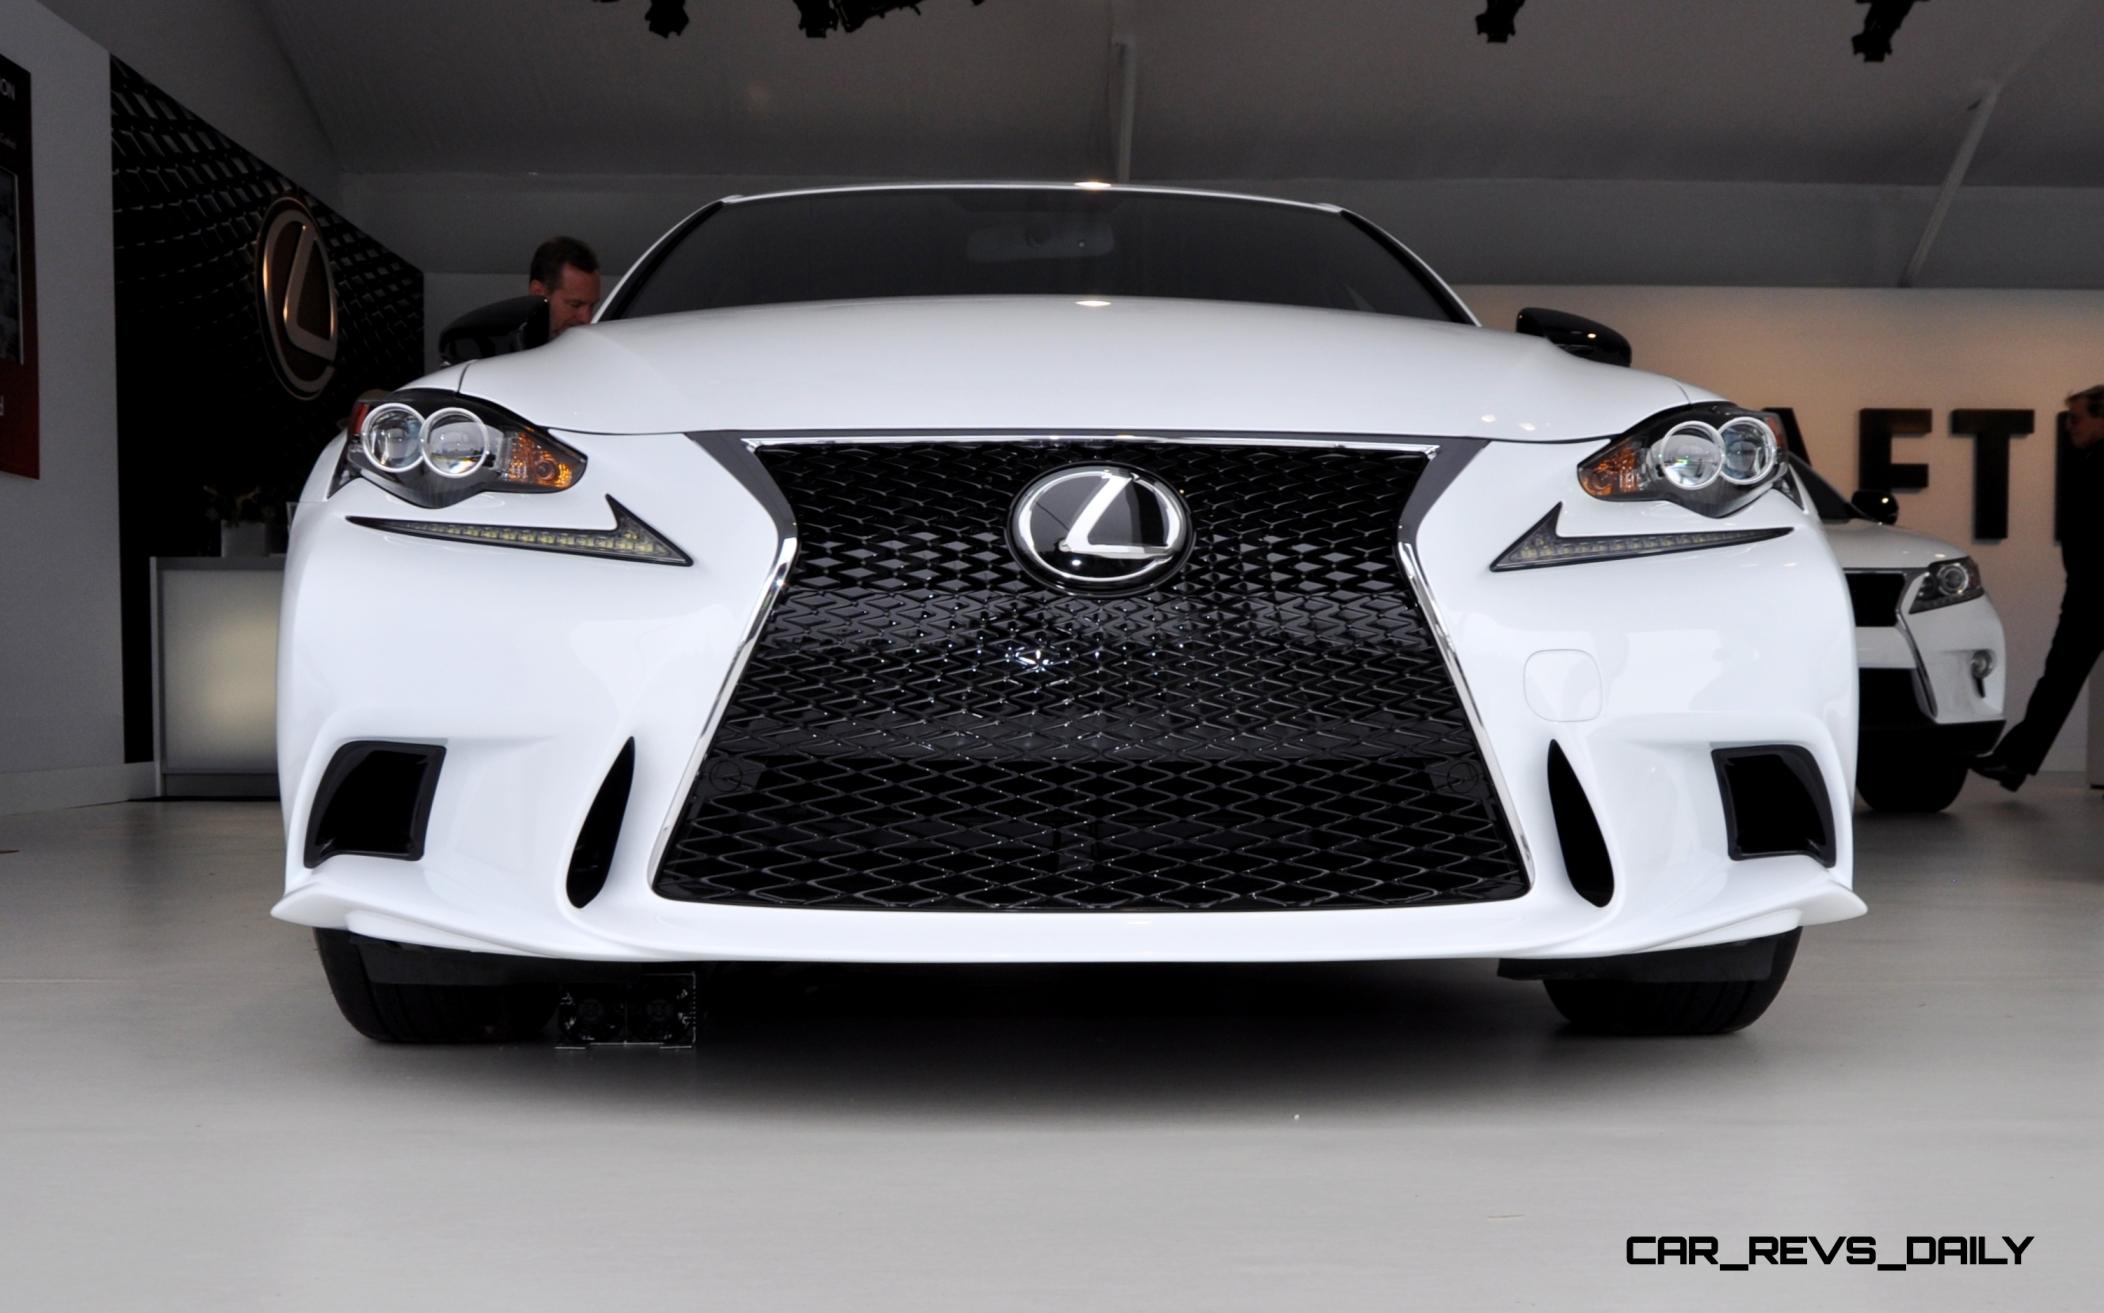 2015 Lexus Is250 F Sport Crafted Line In 32 All New High Res Photos Car Revs Daily Com